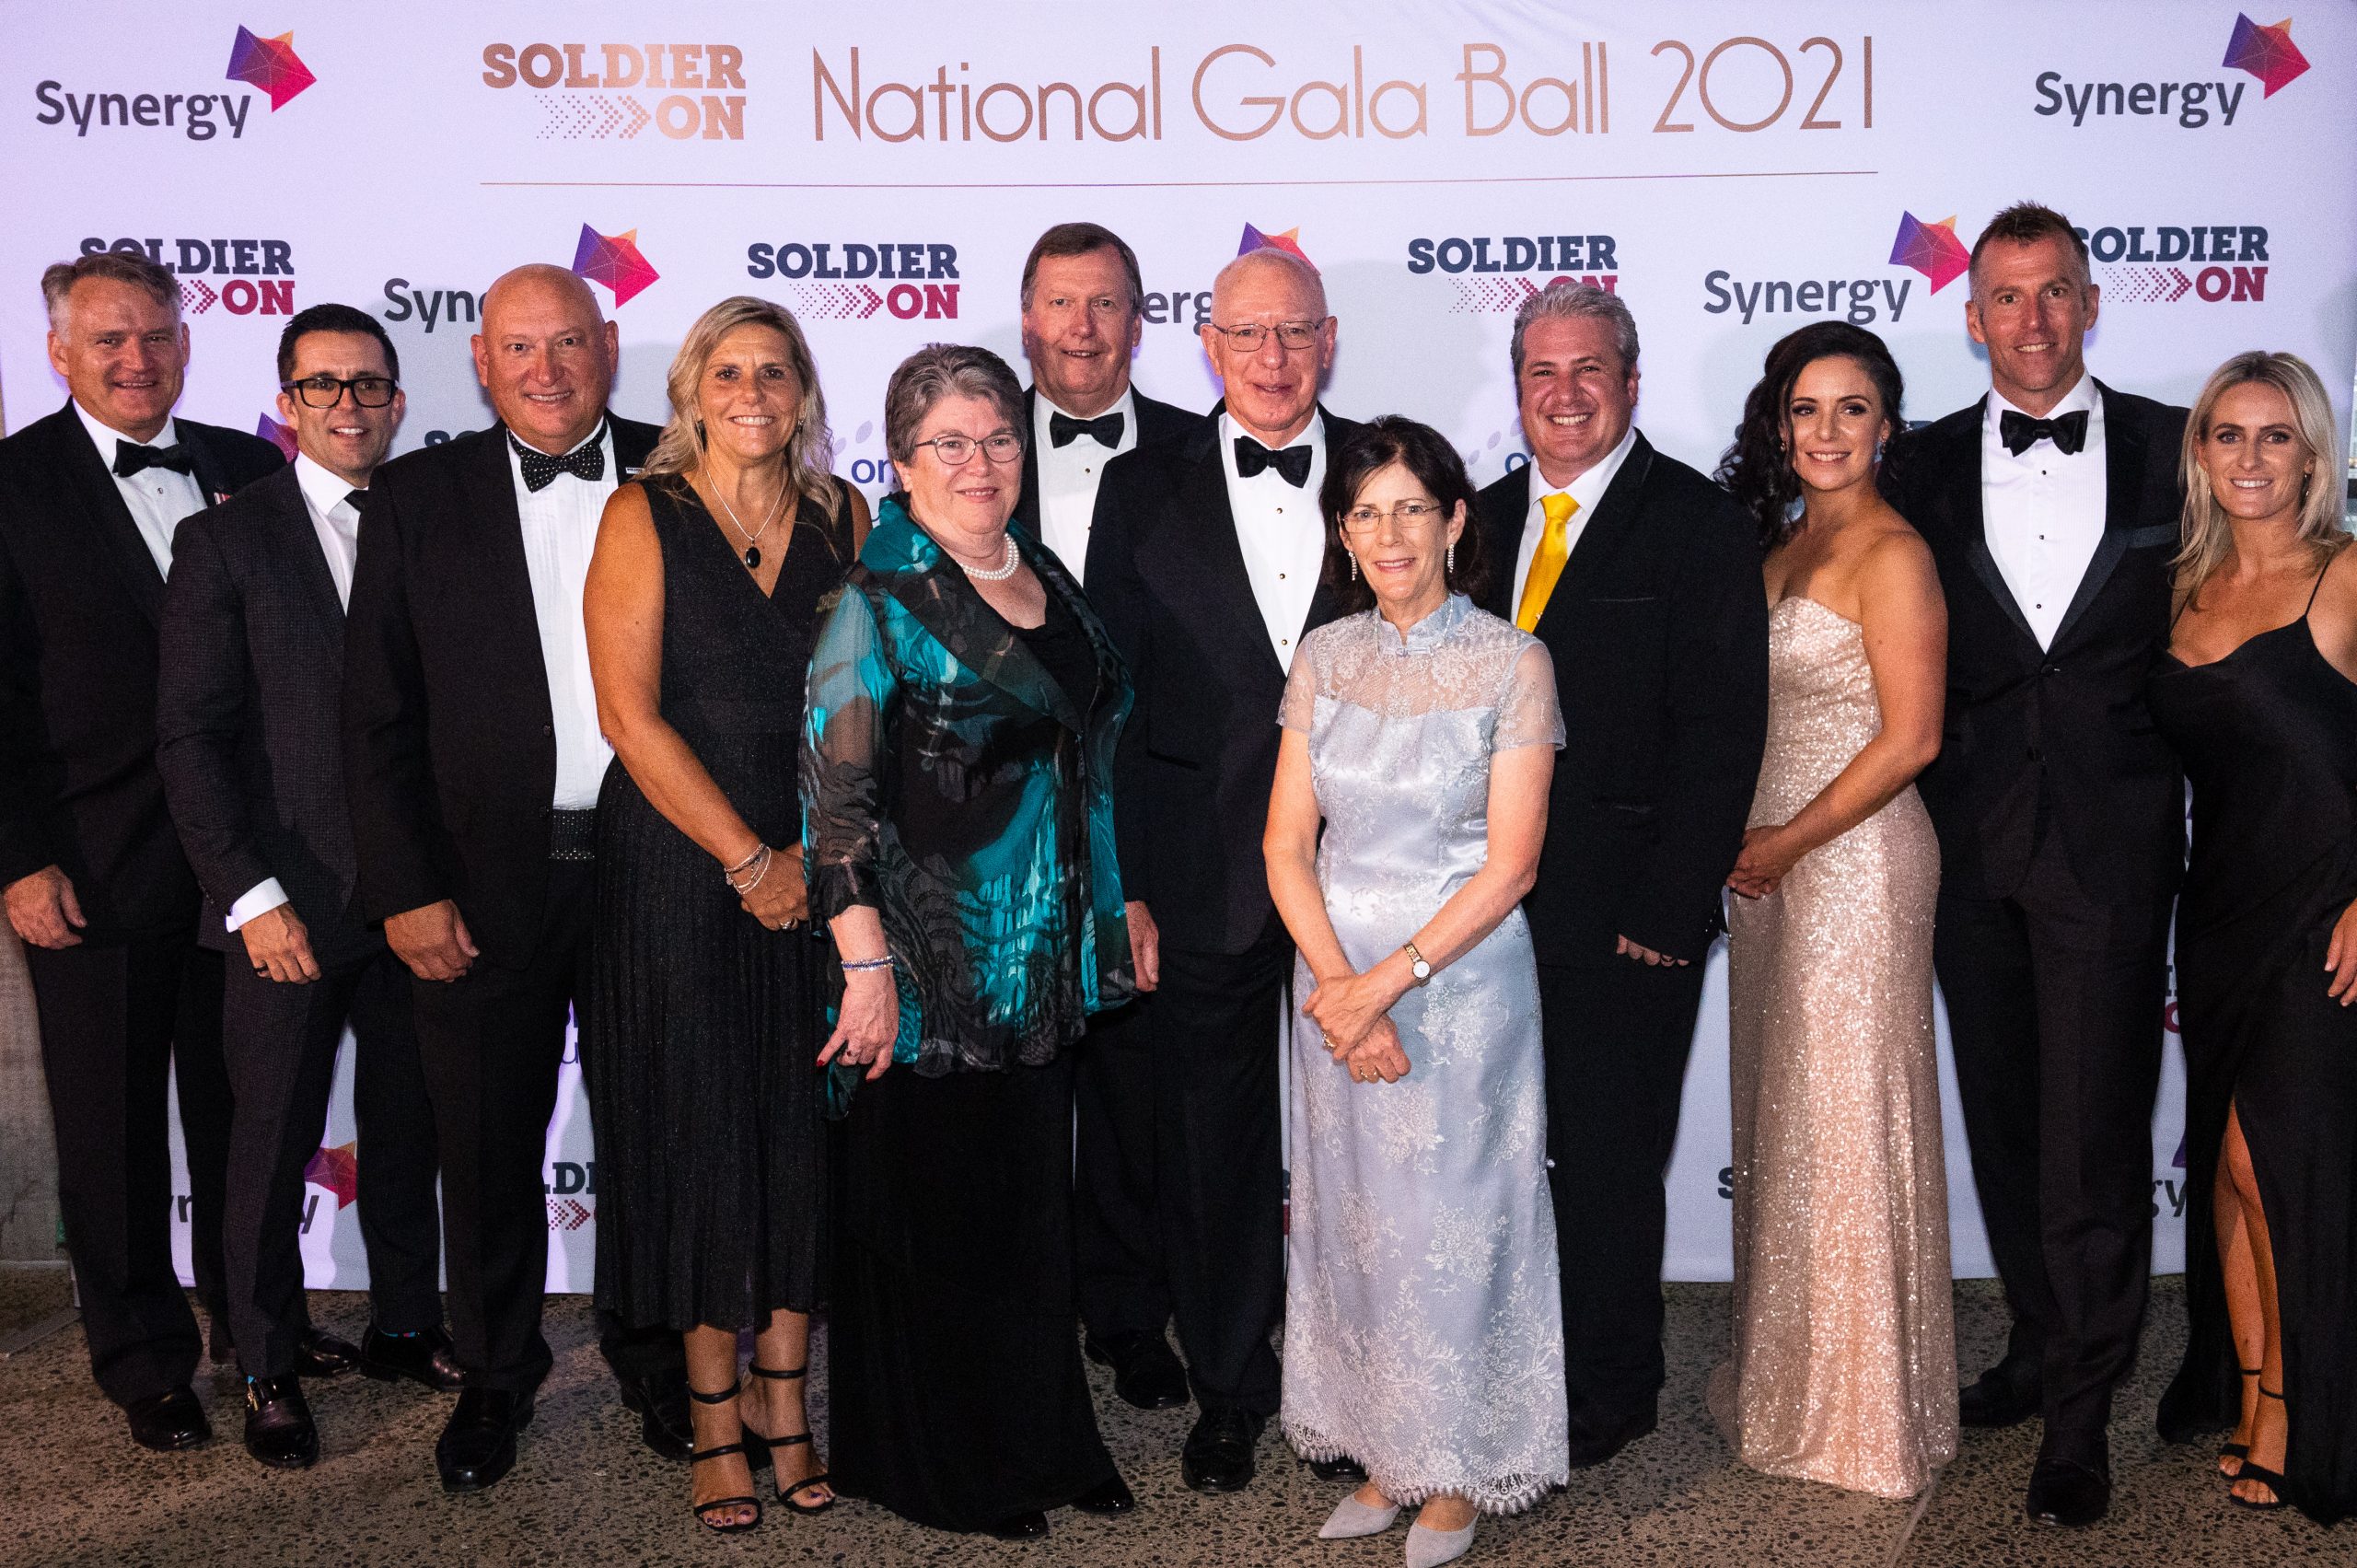 SOLDIER ON’S NATIONAL GALA BALL RAISES MORE THAN $150,000 FOR VETERAN SERVICES